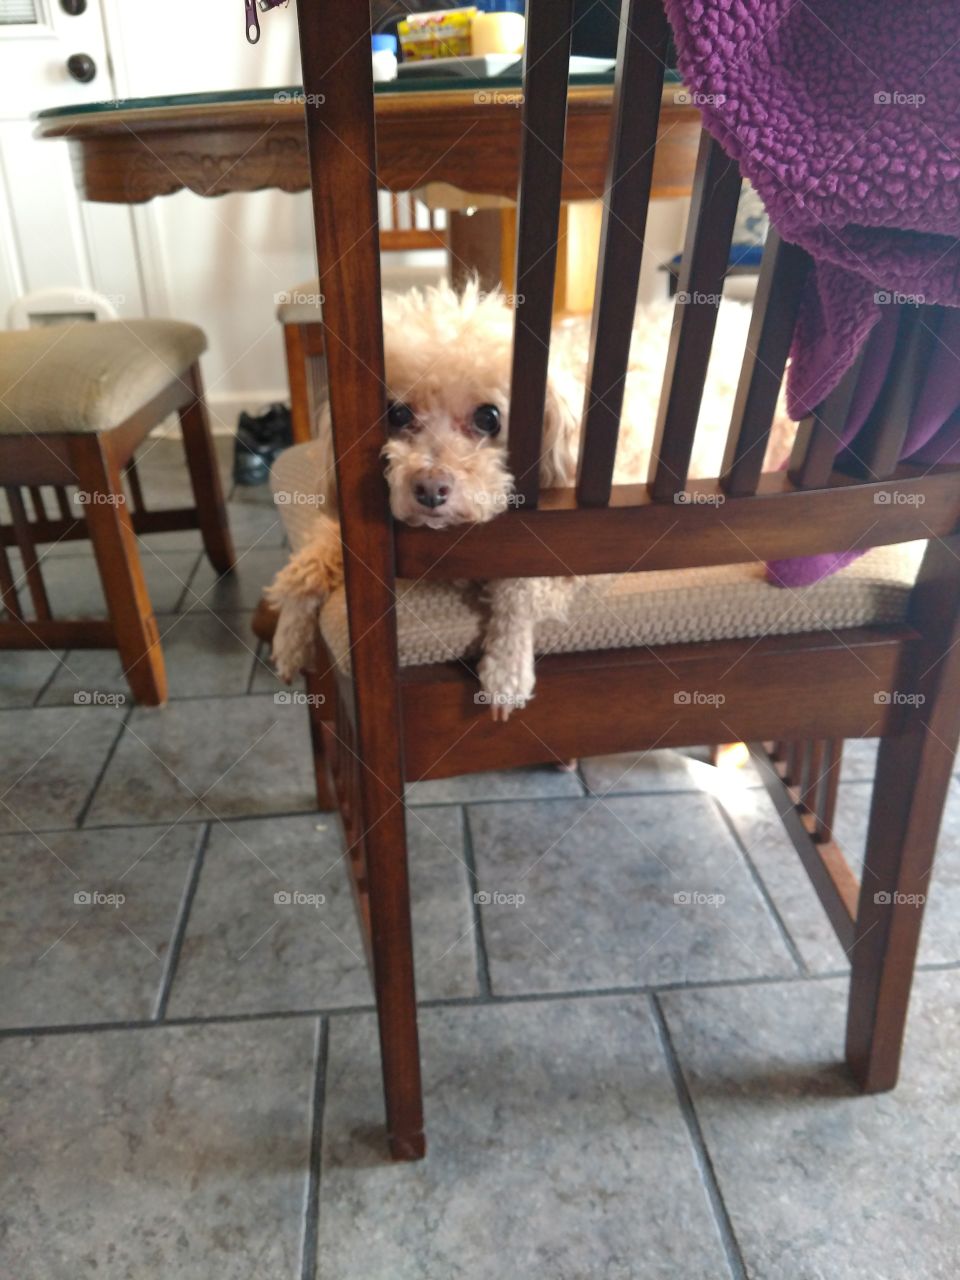 dog in chair between bars